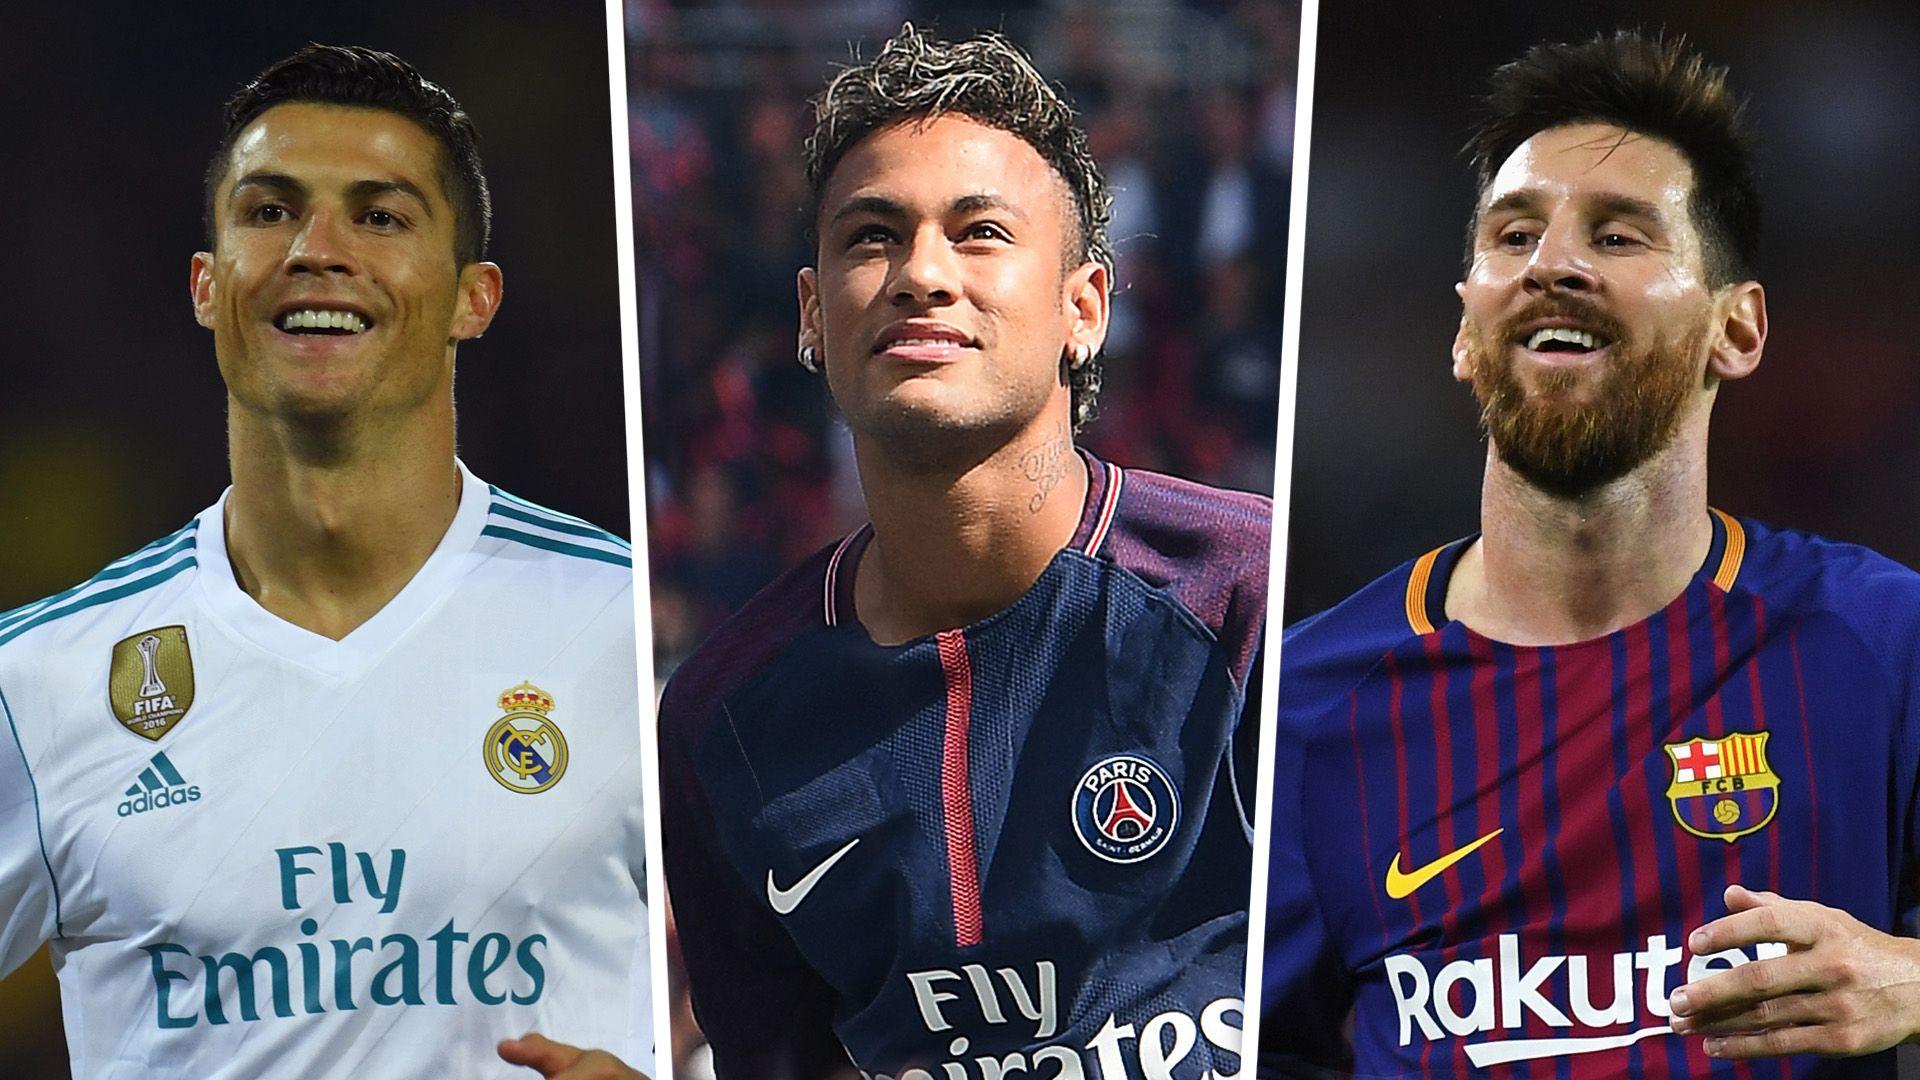 Footballers' net worth: How much do Ronaldo, Messi & the top stars